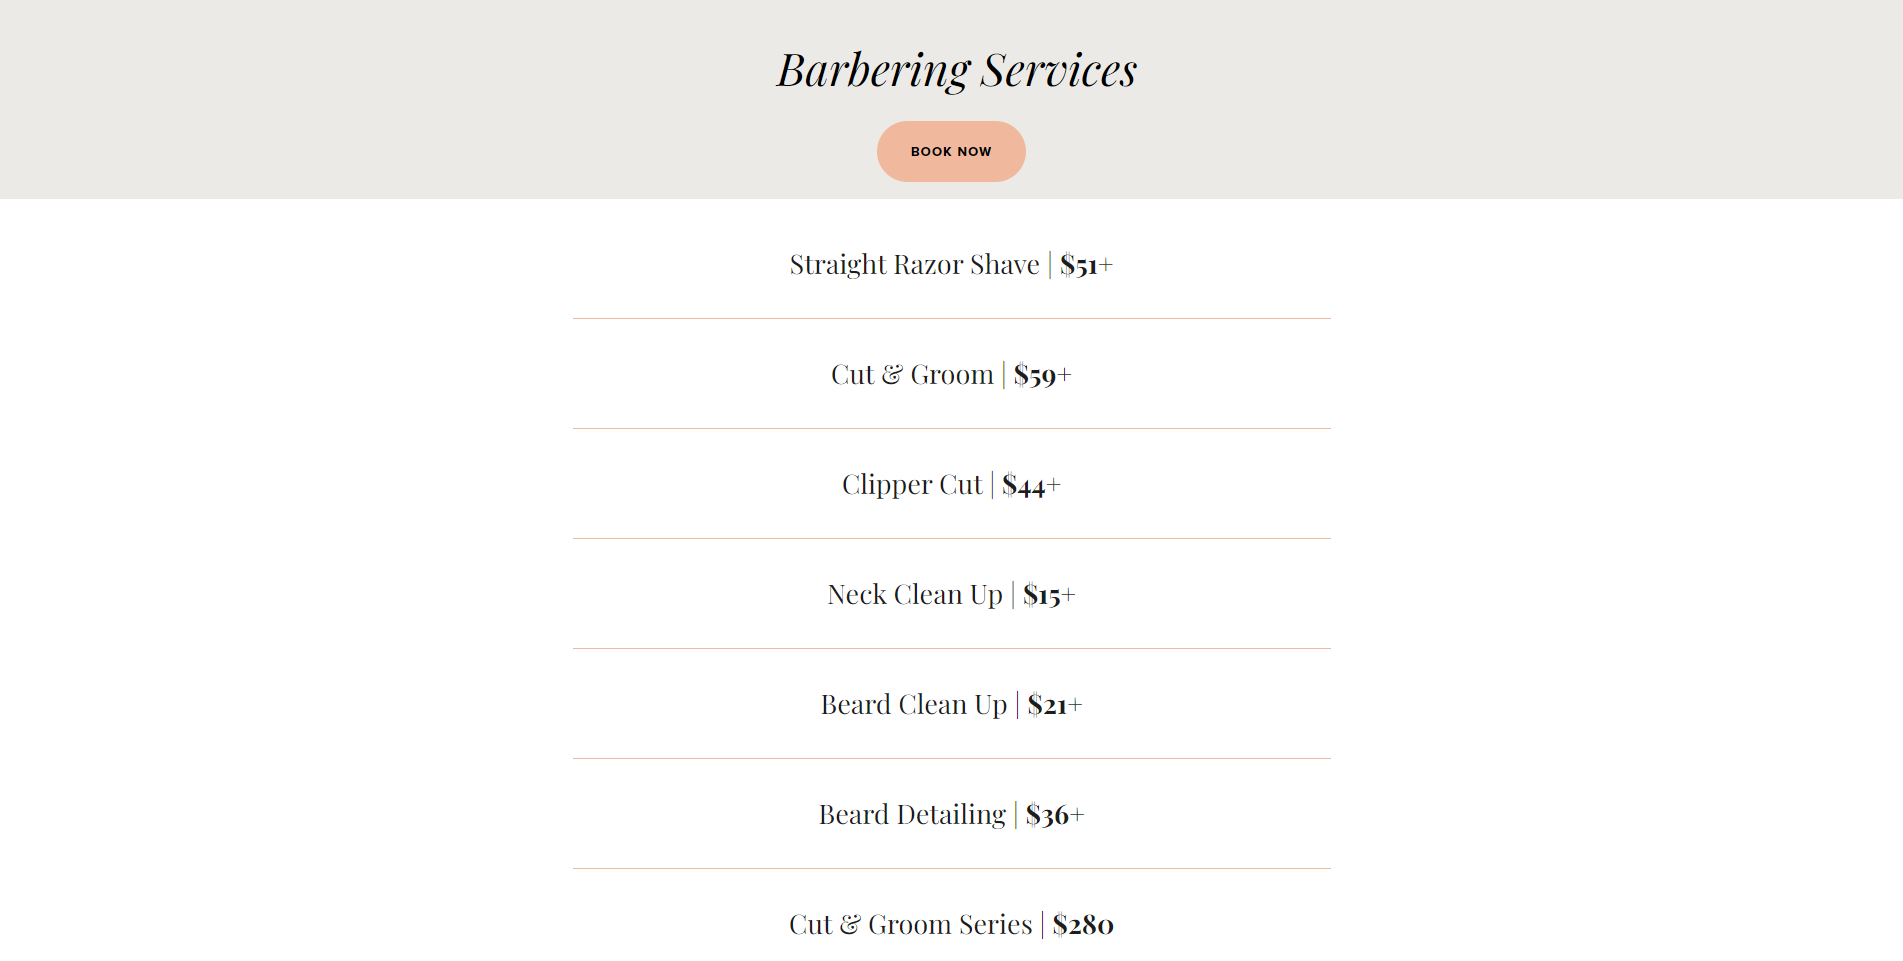 Barbering services and their prices.